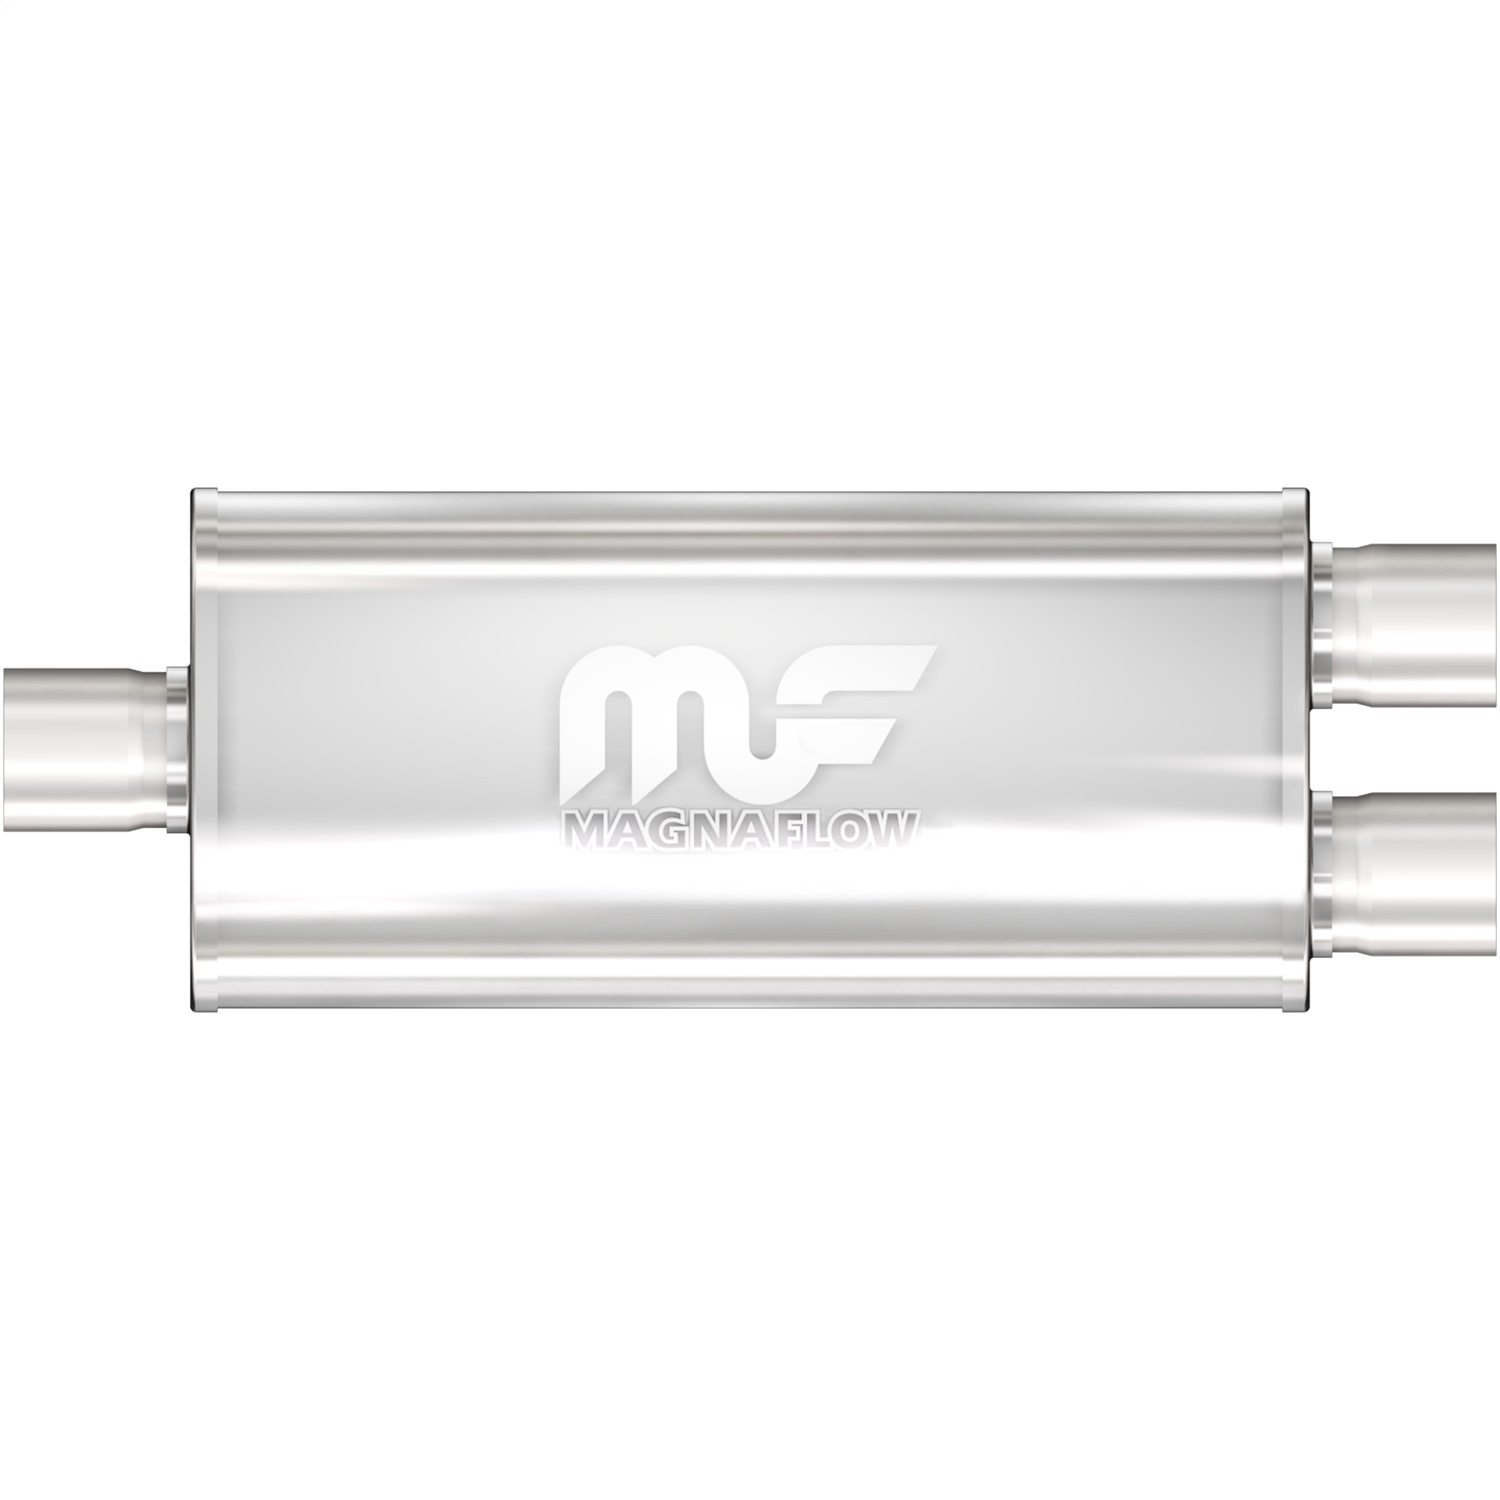 MagnaFlow Exhaust Products Magnaflow Performance Exhaust 12278 Stainless Steel Muffler